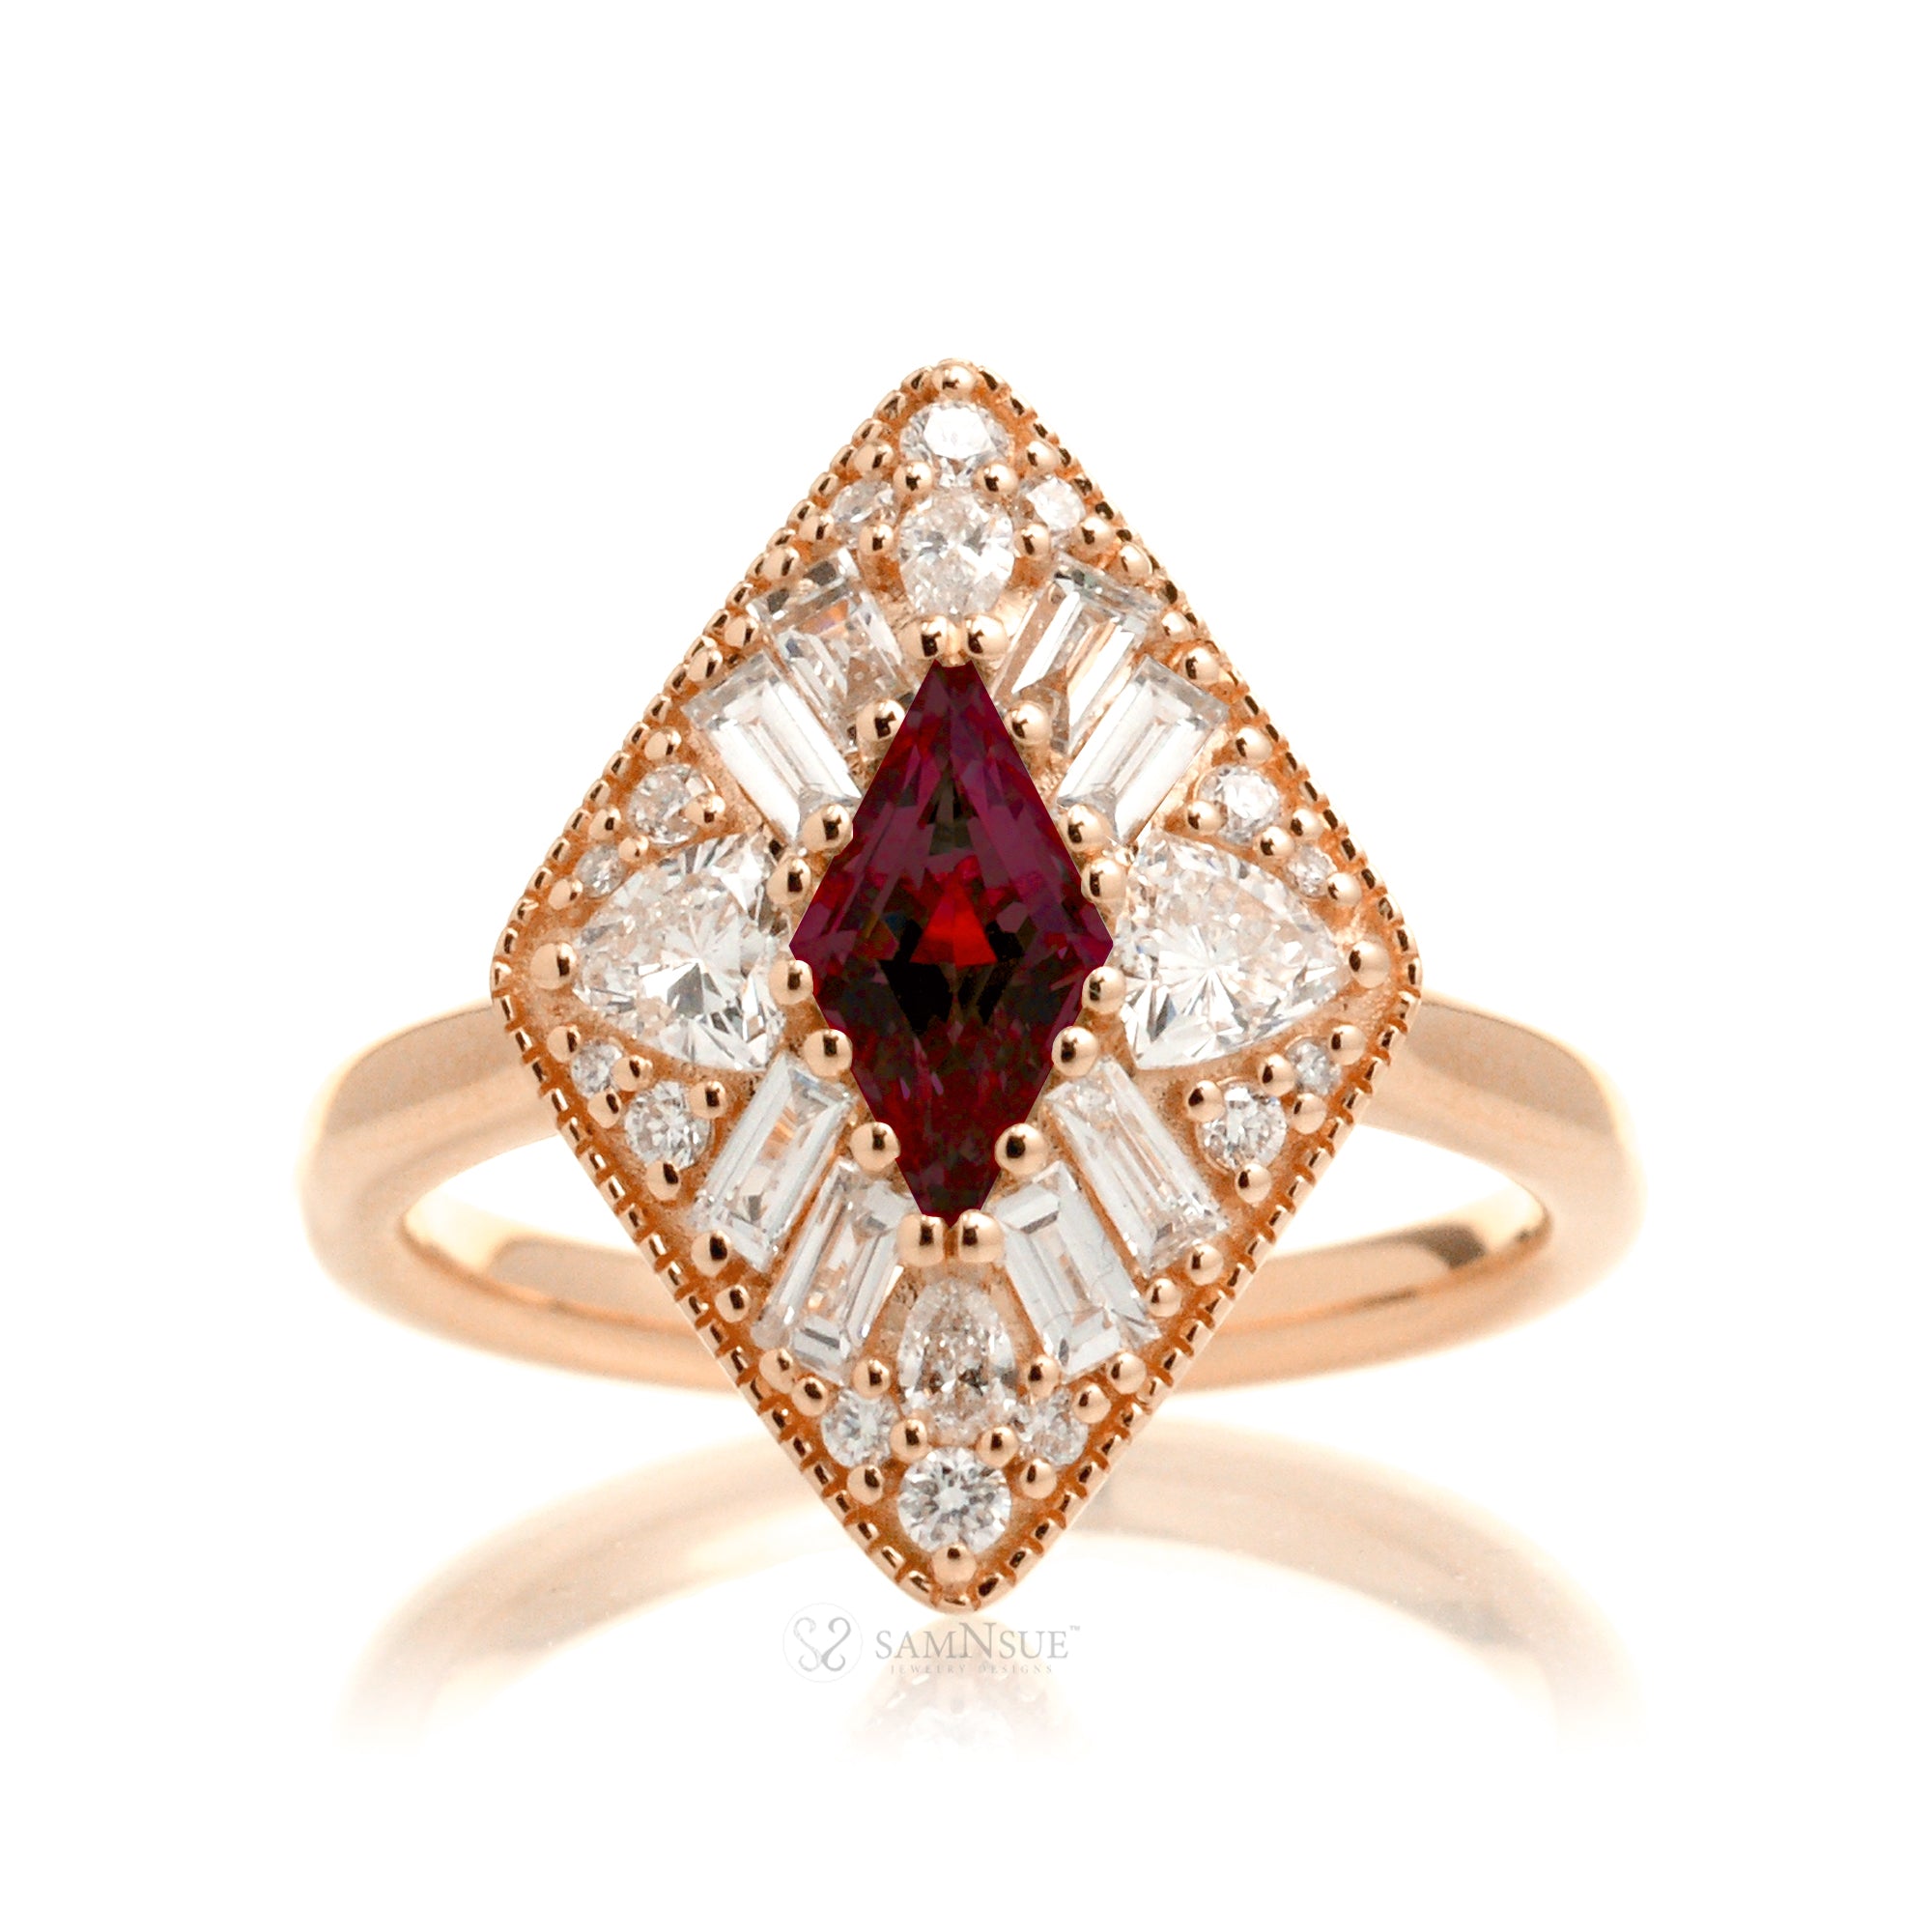 Kite cut ruby and diamond halo ring rose gold vintage style